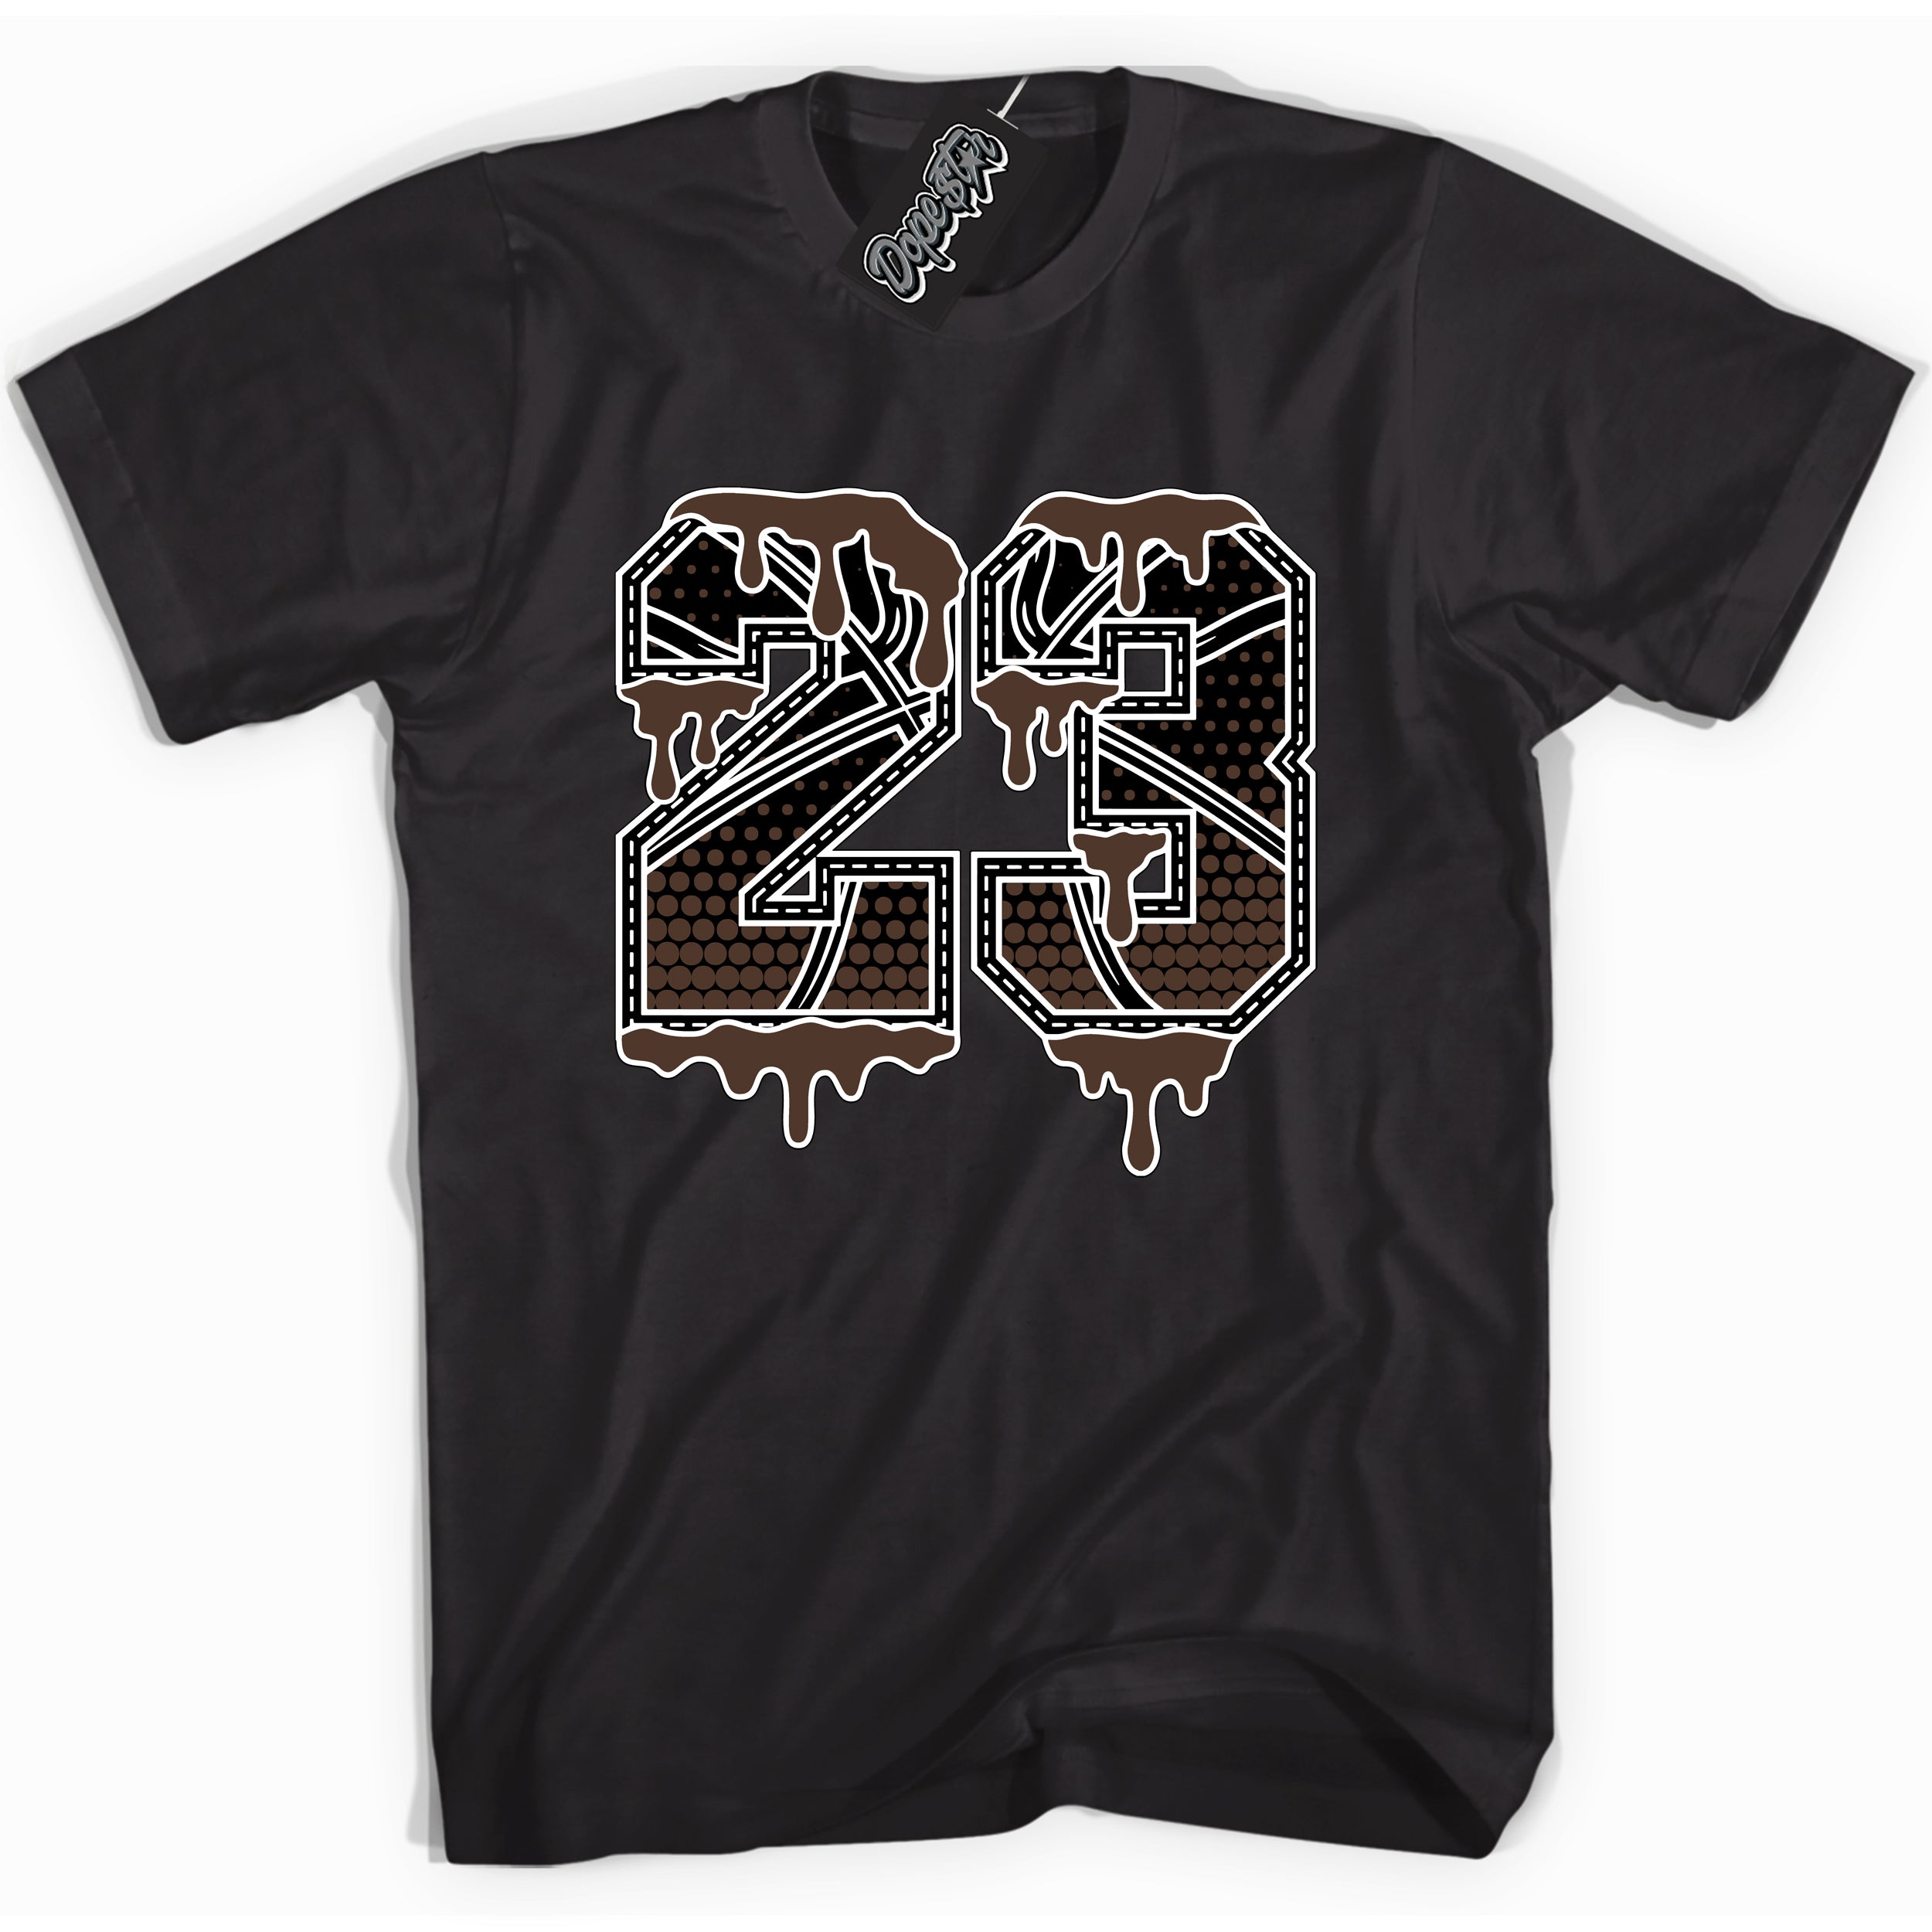 Cool Black graphic tee with “ 23 Ball ” design, that perfectly matches Palomino 1s sneakers 